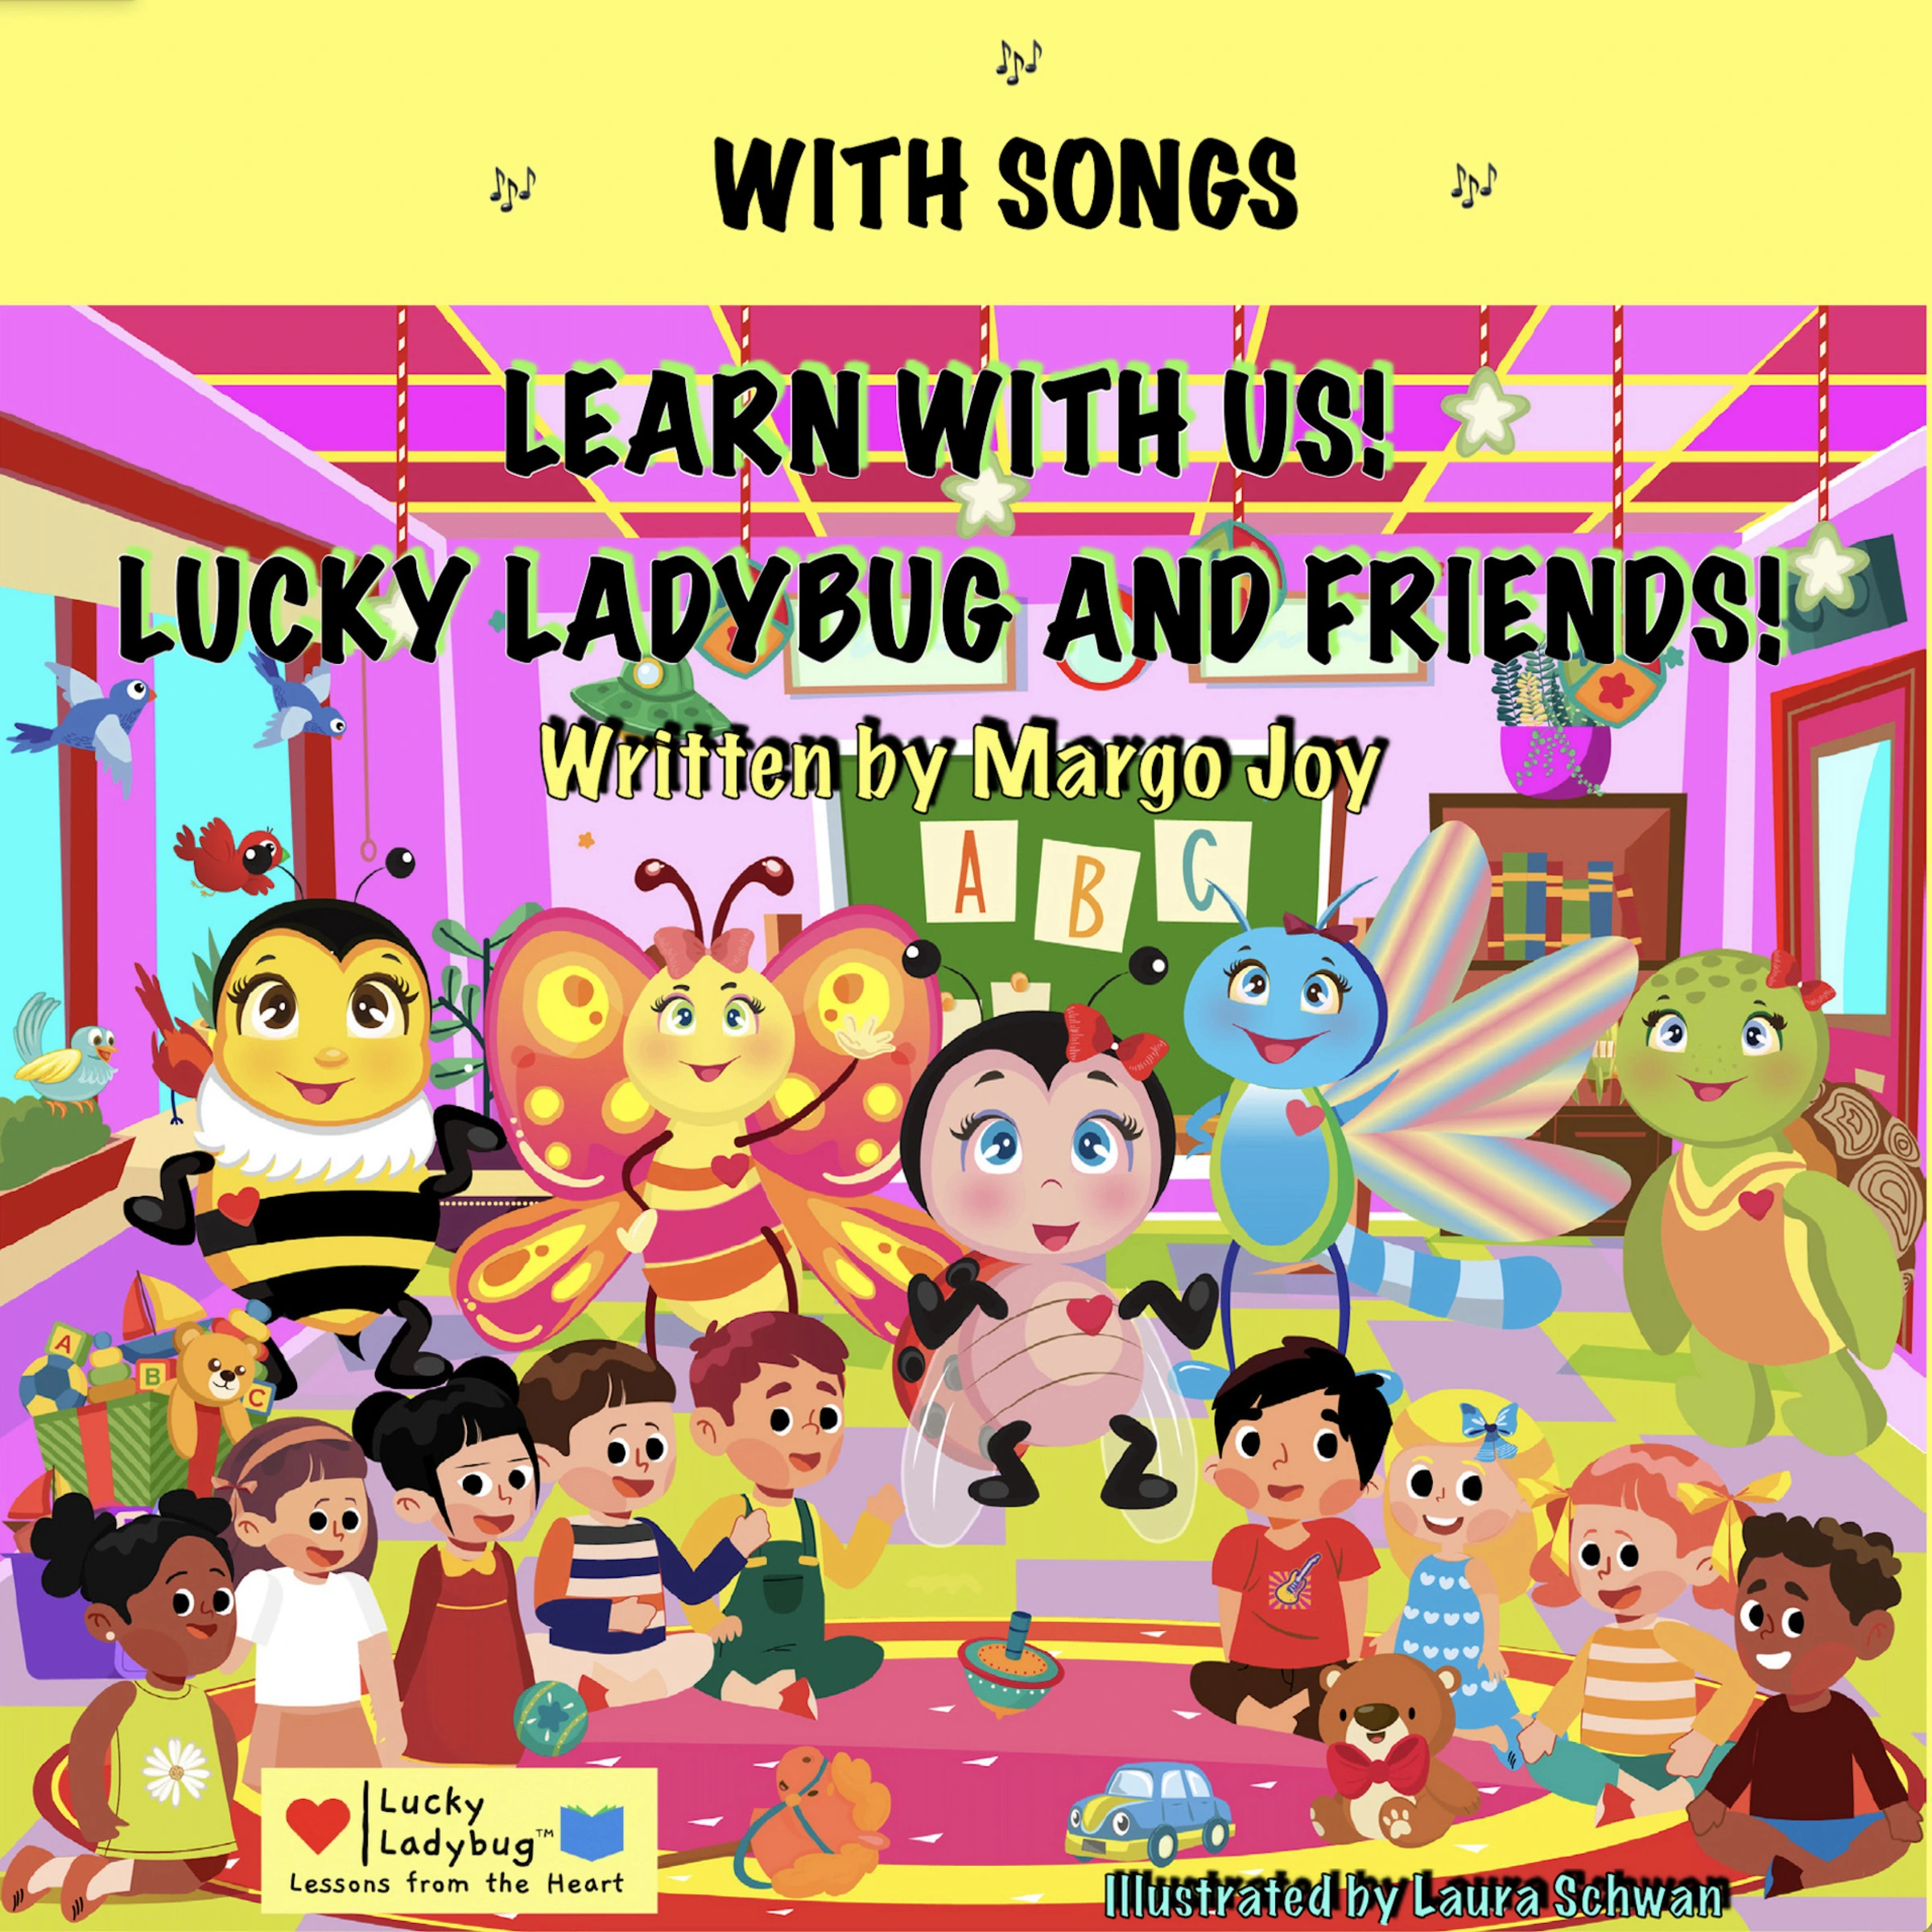 Learn With Us With Songs! Lucky Ladybug And Friends! Audiobook by Margo Joy